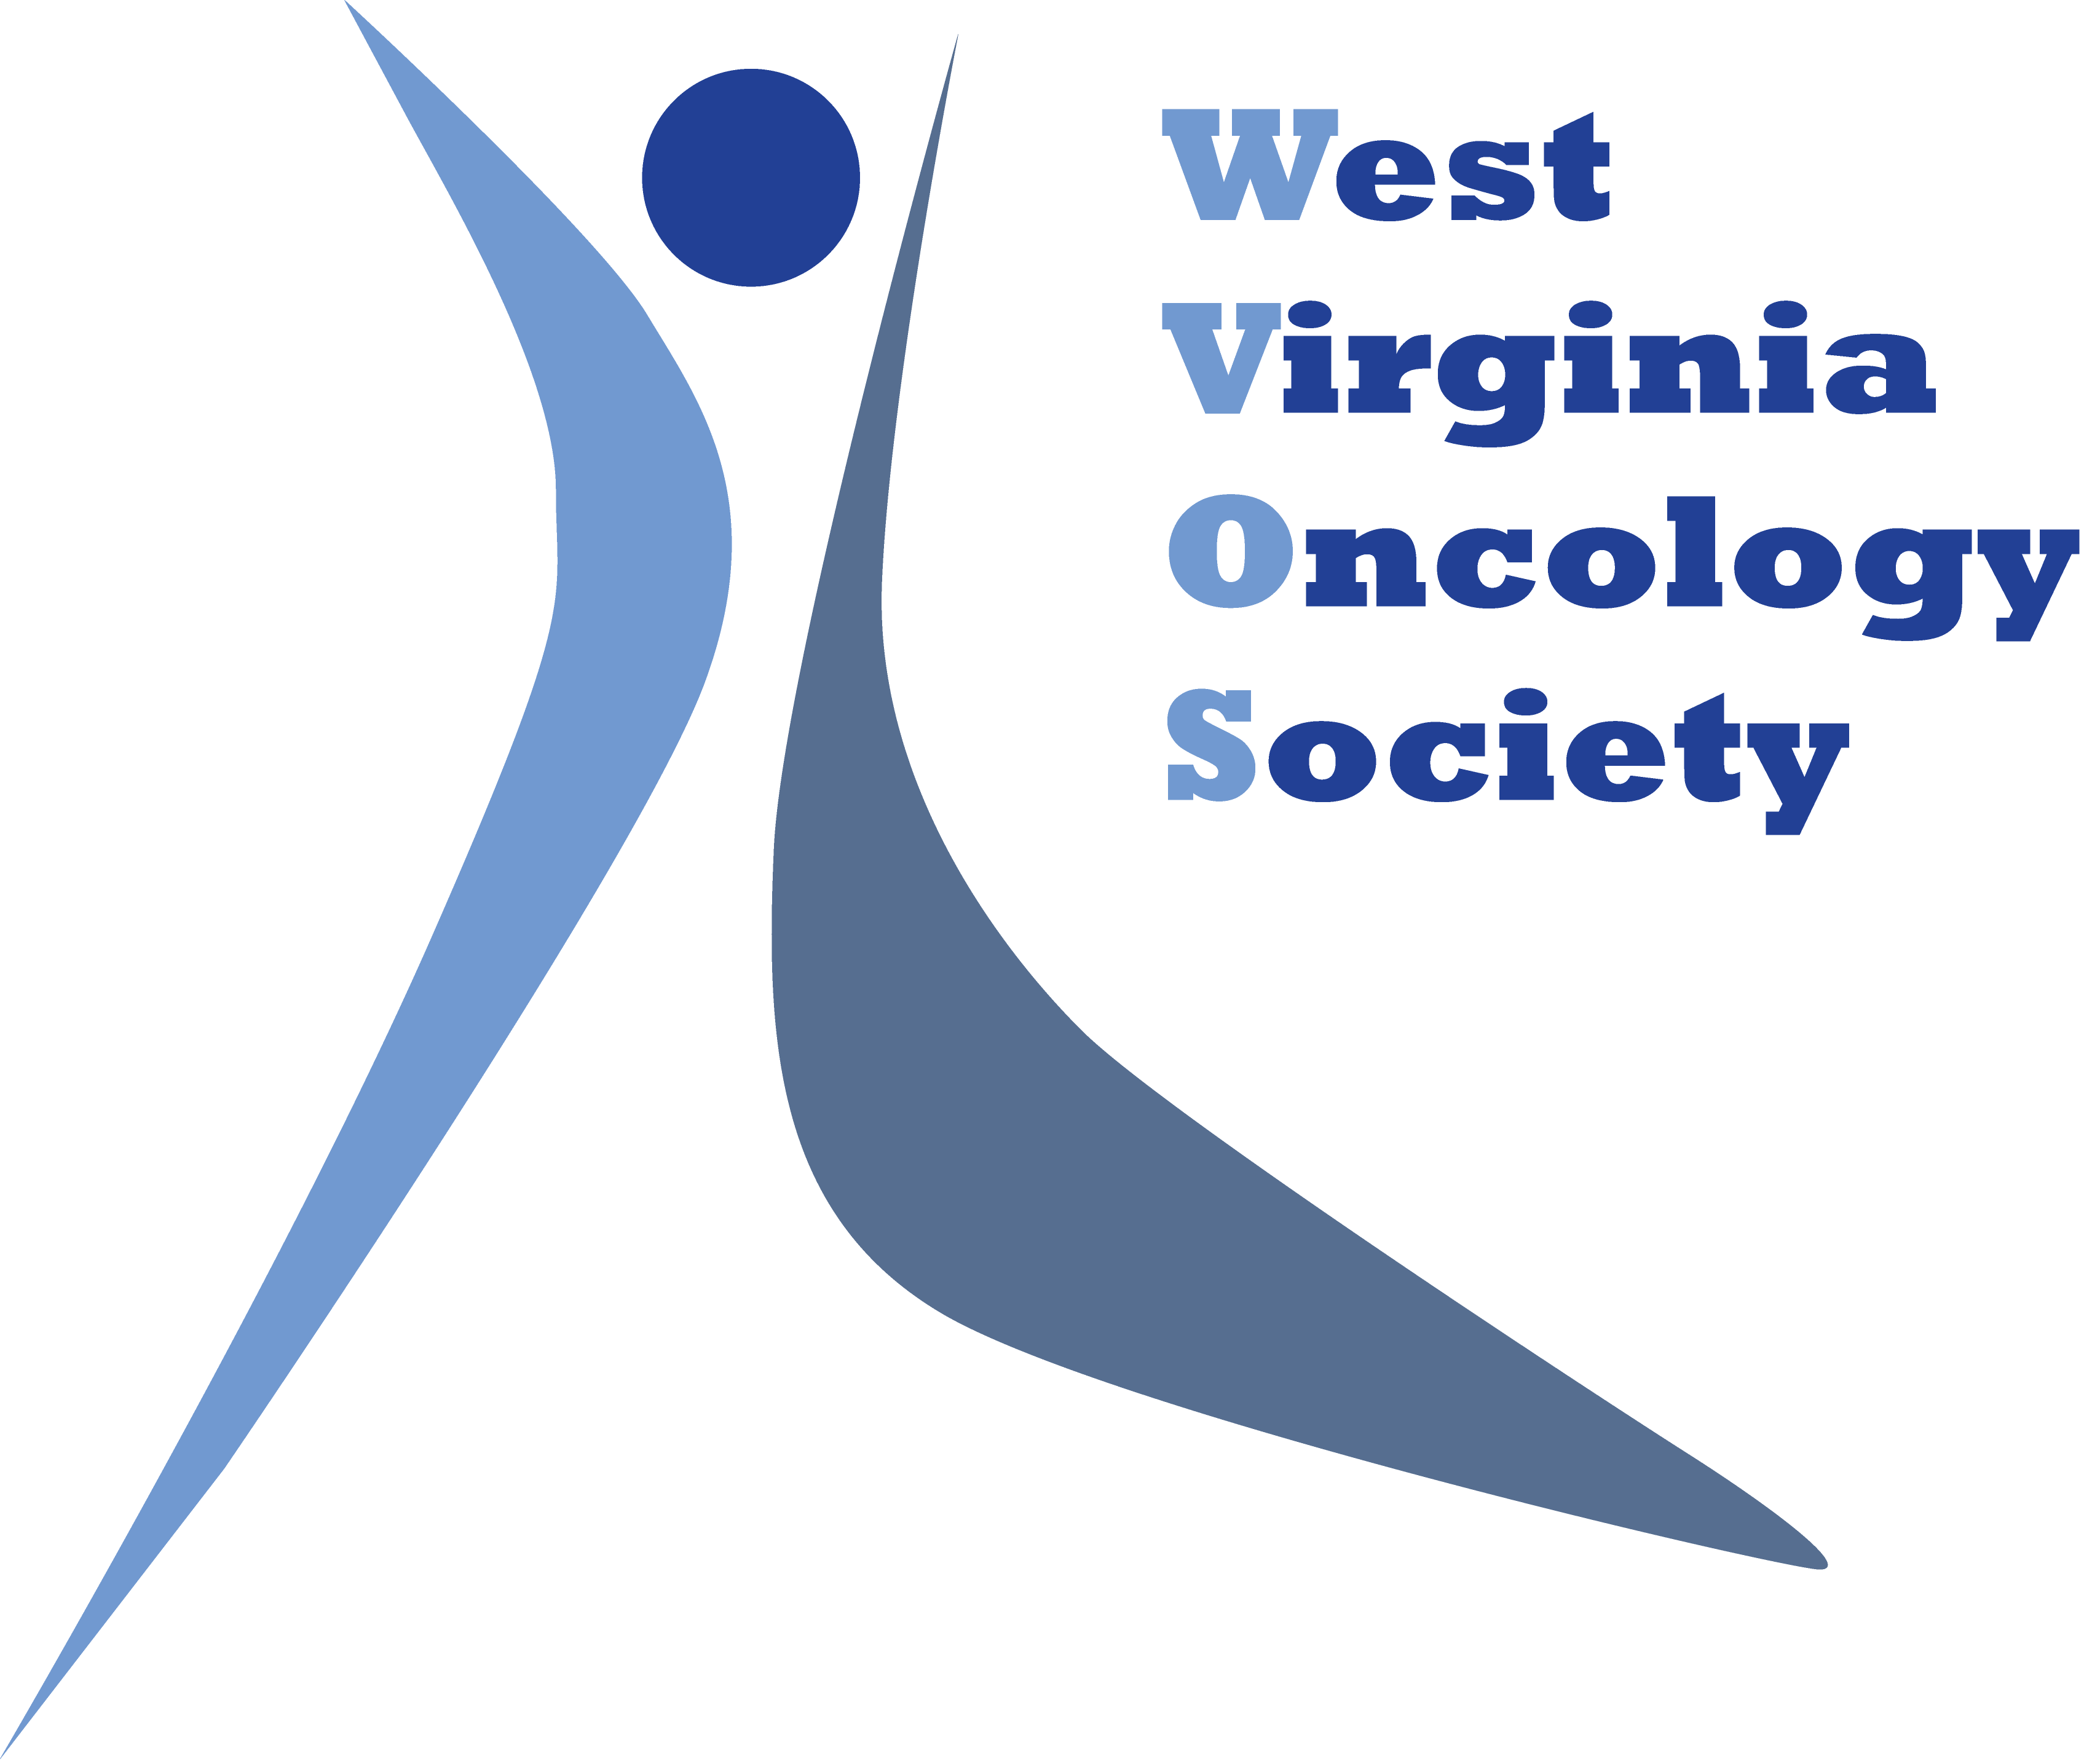 West Virginia Oncology Society logo